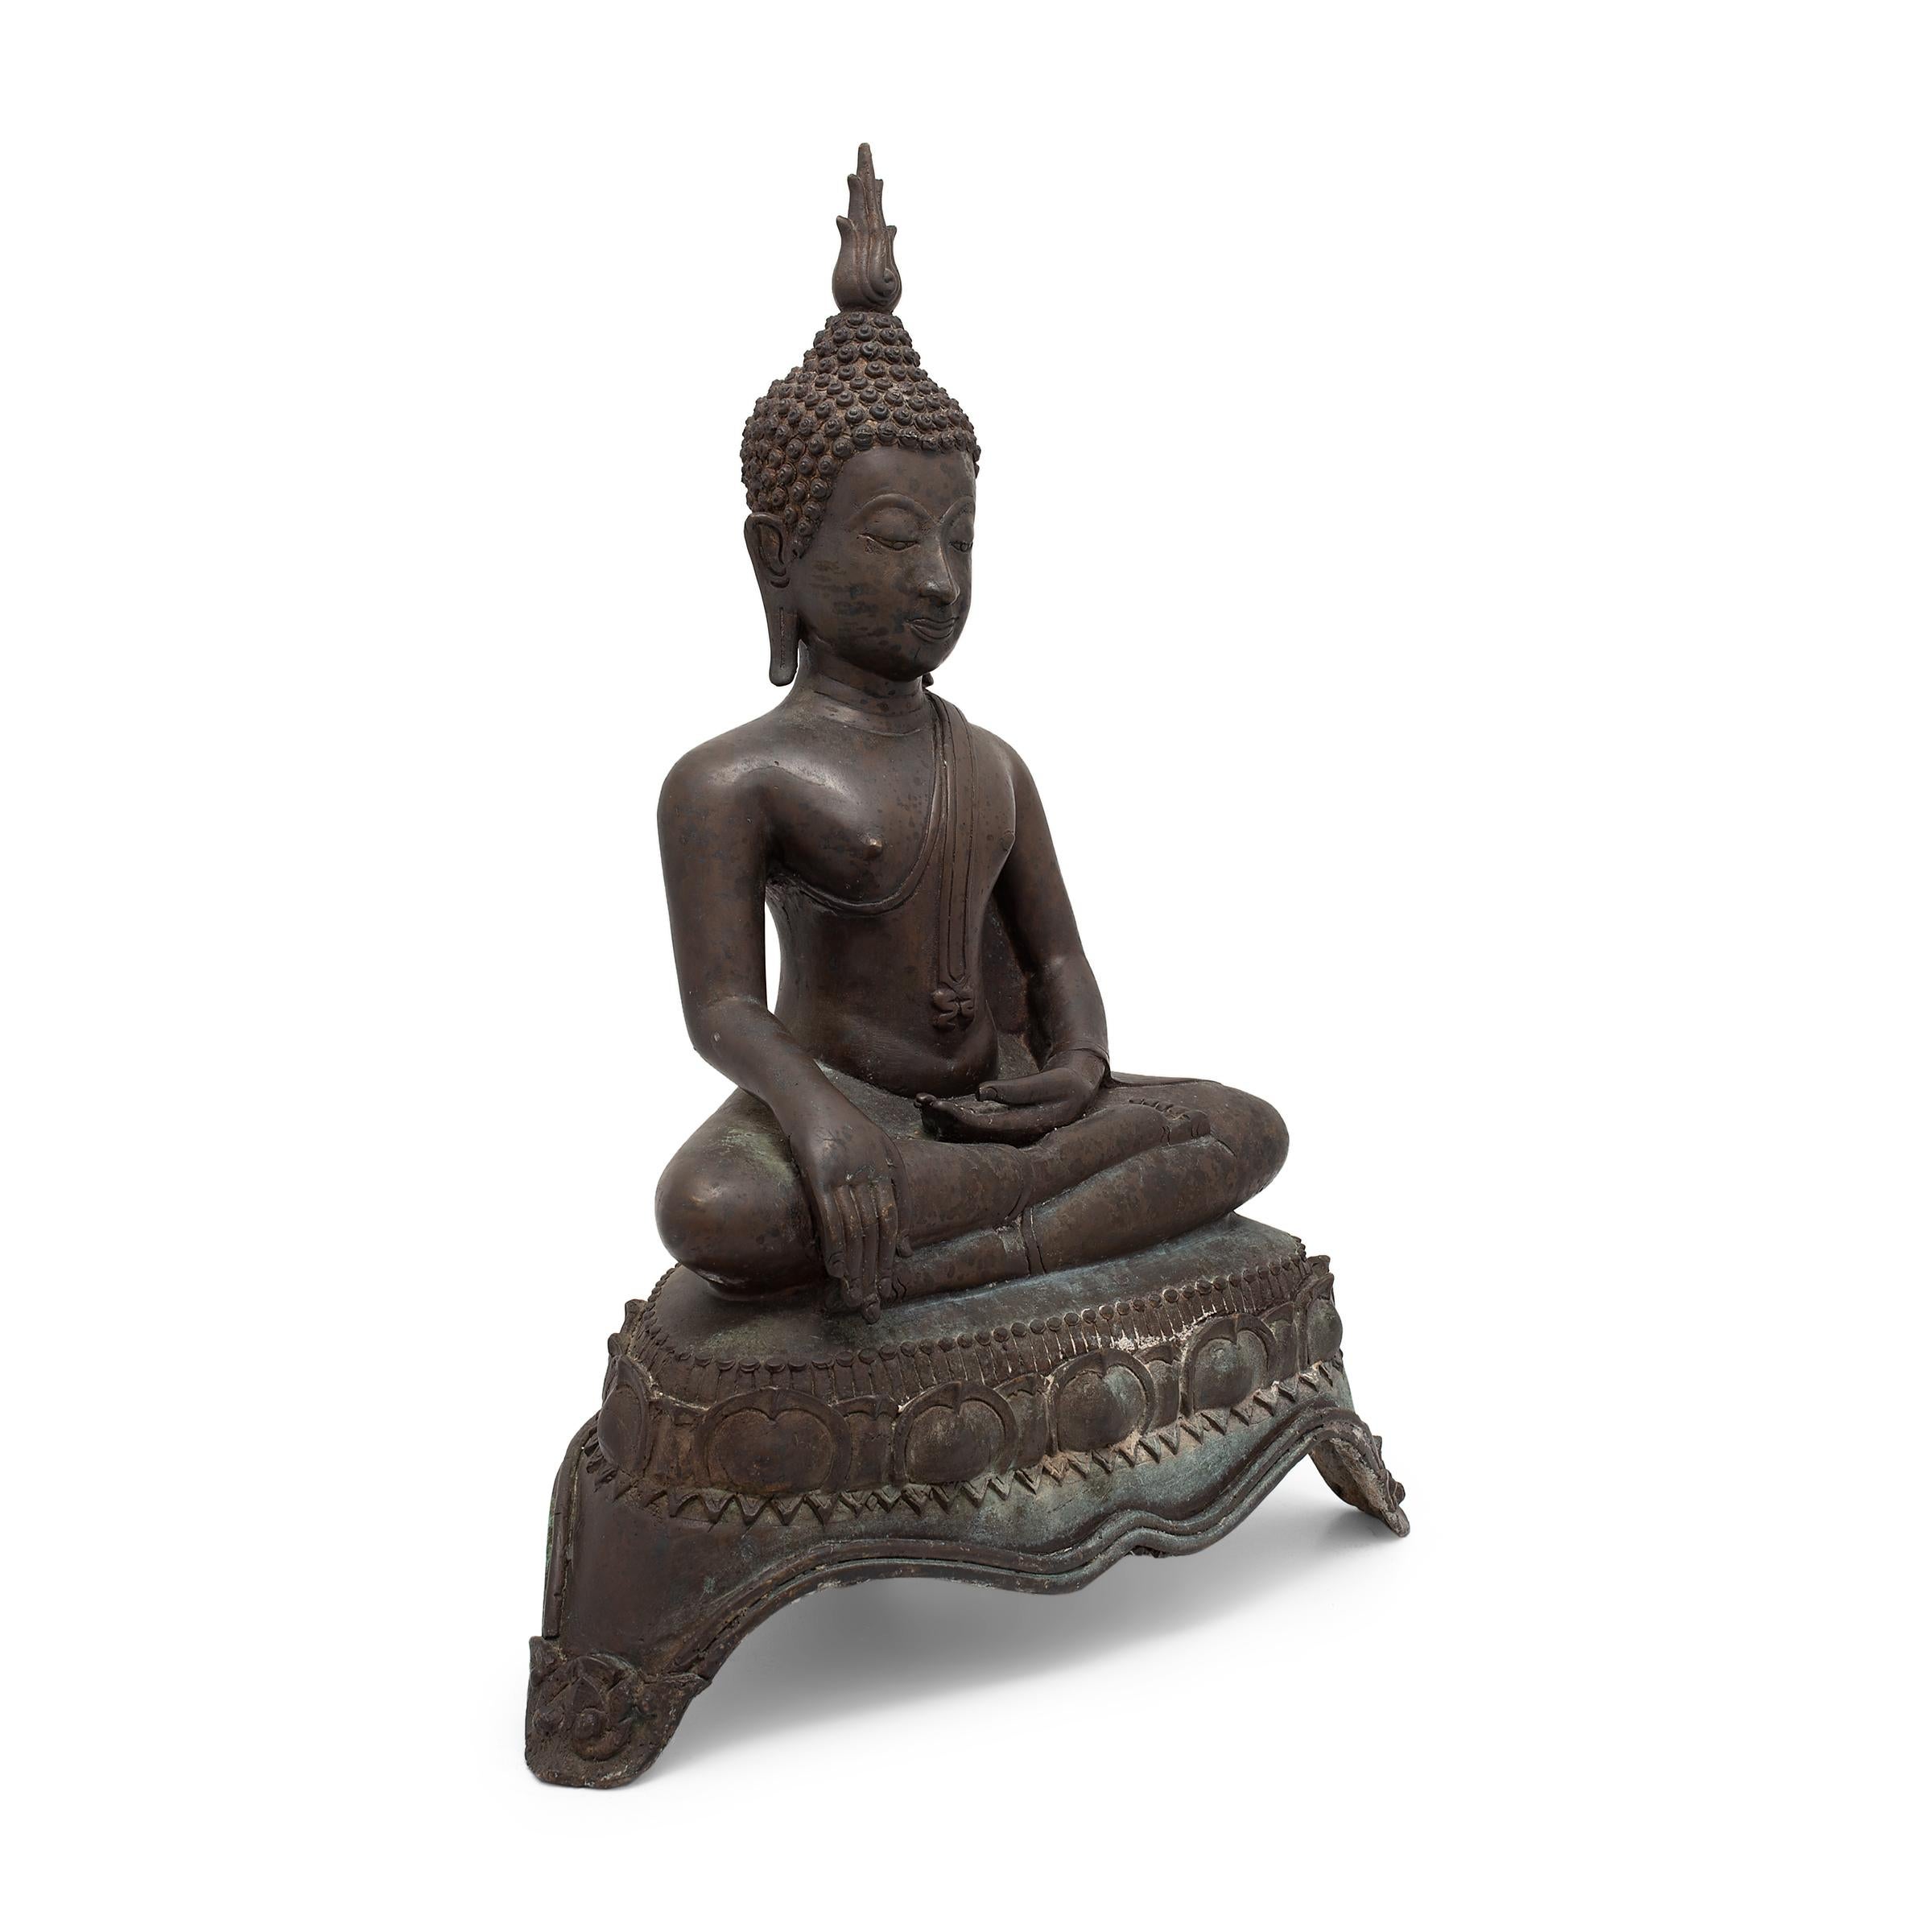 This cast bronze figure dates to the 19th century and depicts the Buddha Shakyamuni in perpetual meditation. Also known as Shaka or Siddhartha Gautama, Shakyamuni is revered as a fully enlightened being and the source of all Buddhist teachings and